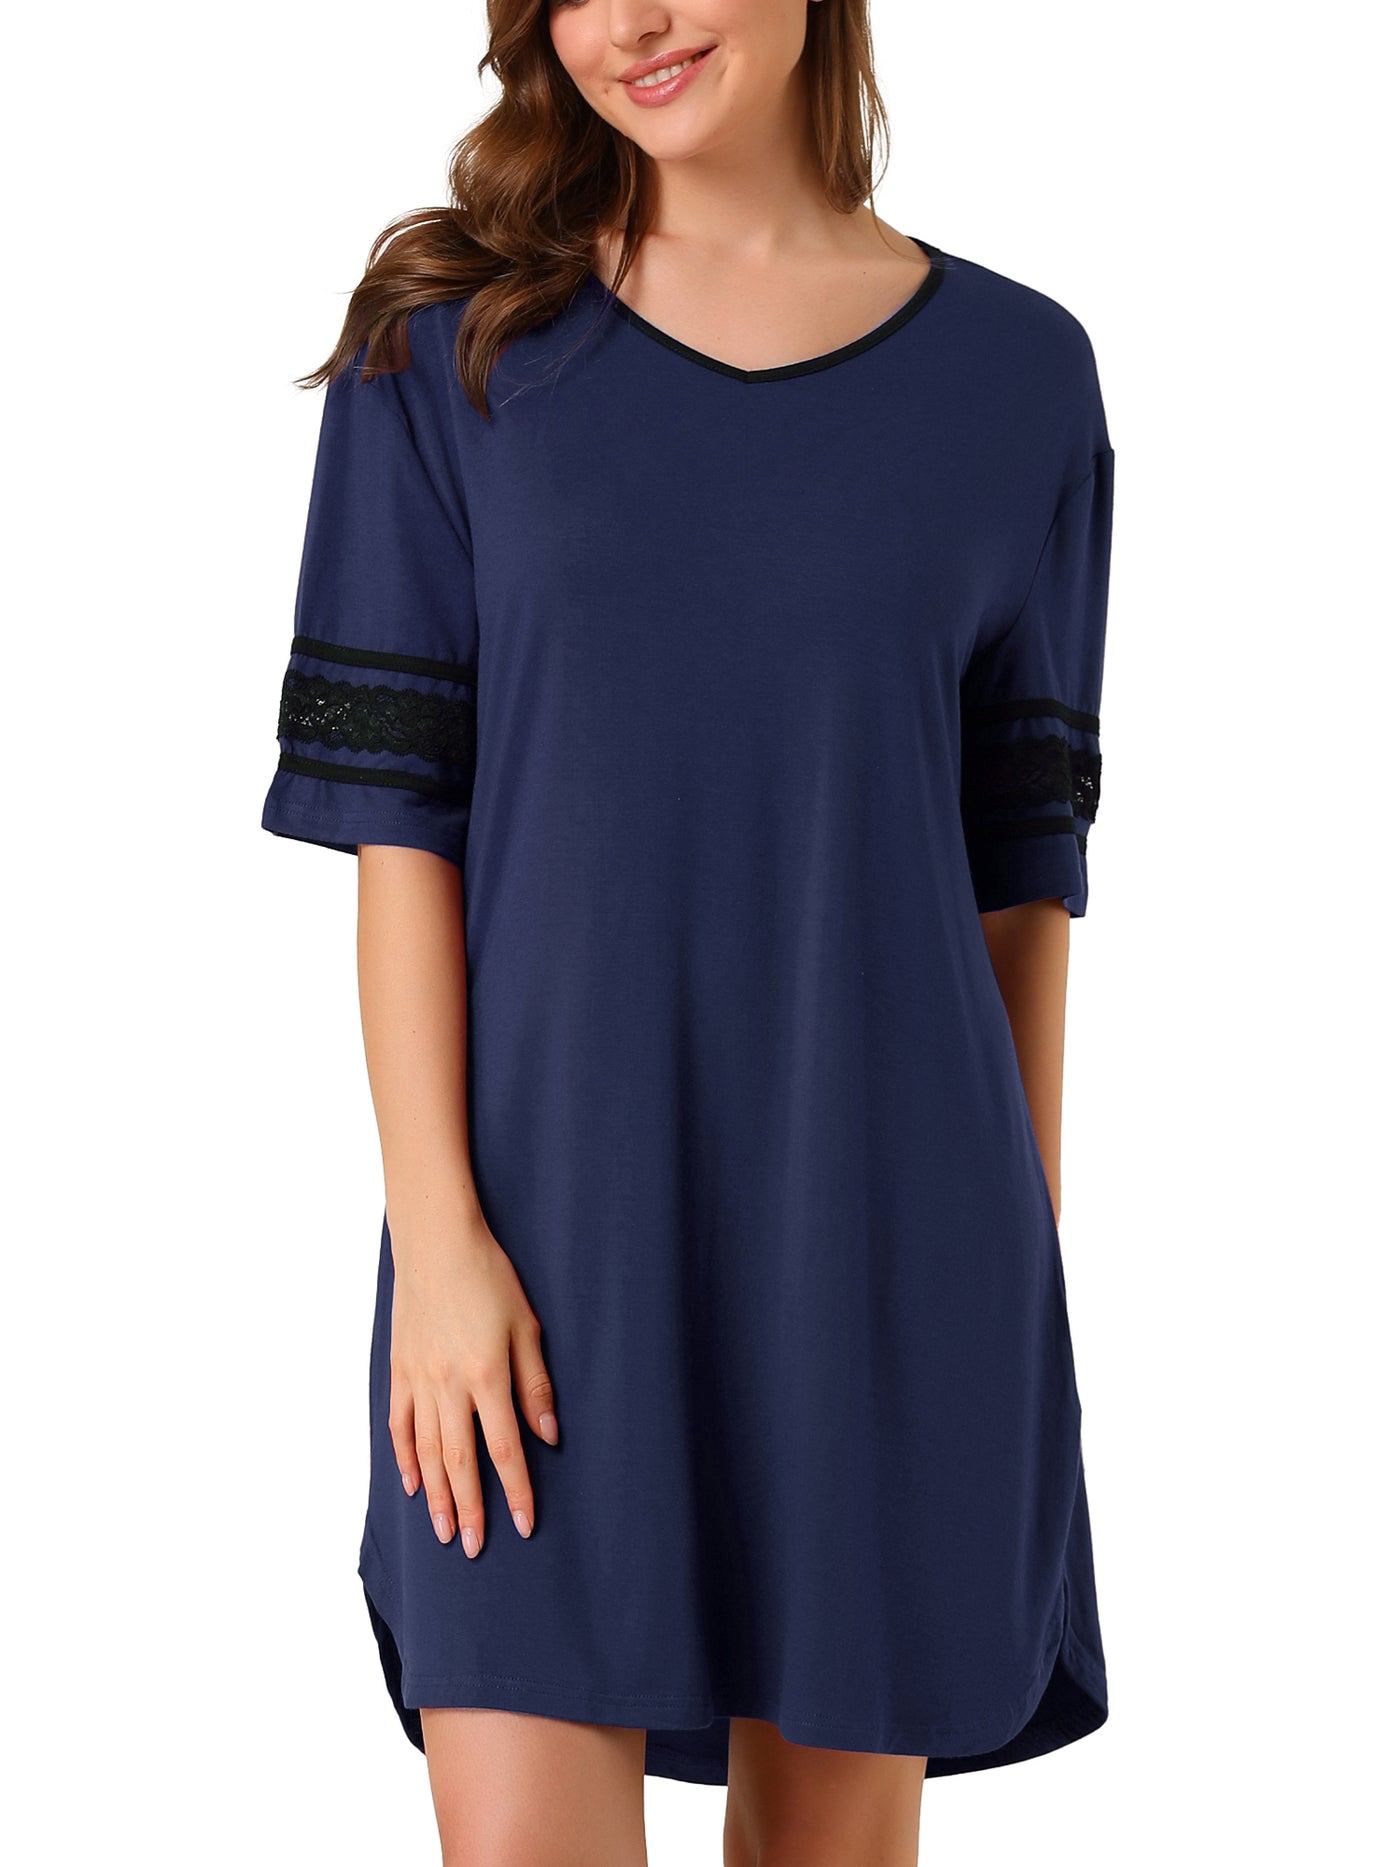 Allegra K Color Contrast Lace Short Sleeve Loose Sleepshirt Soft Nightgowns